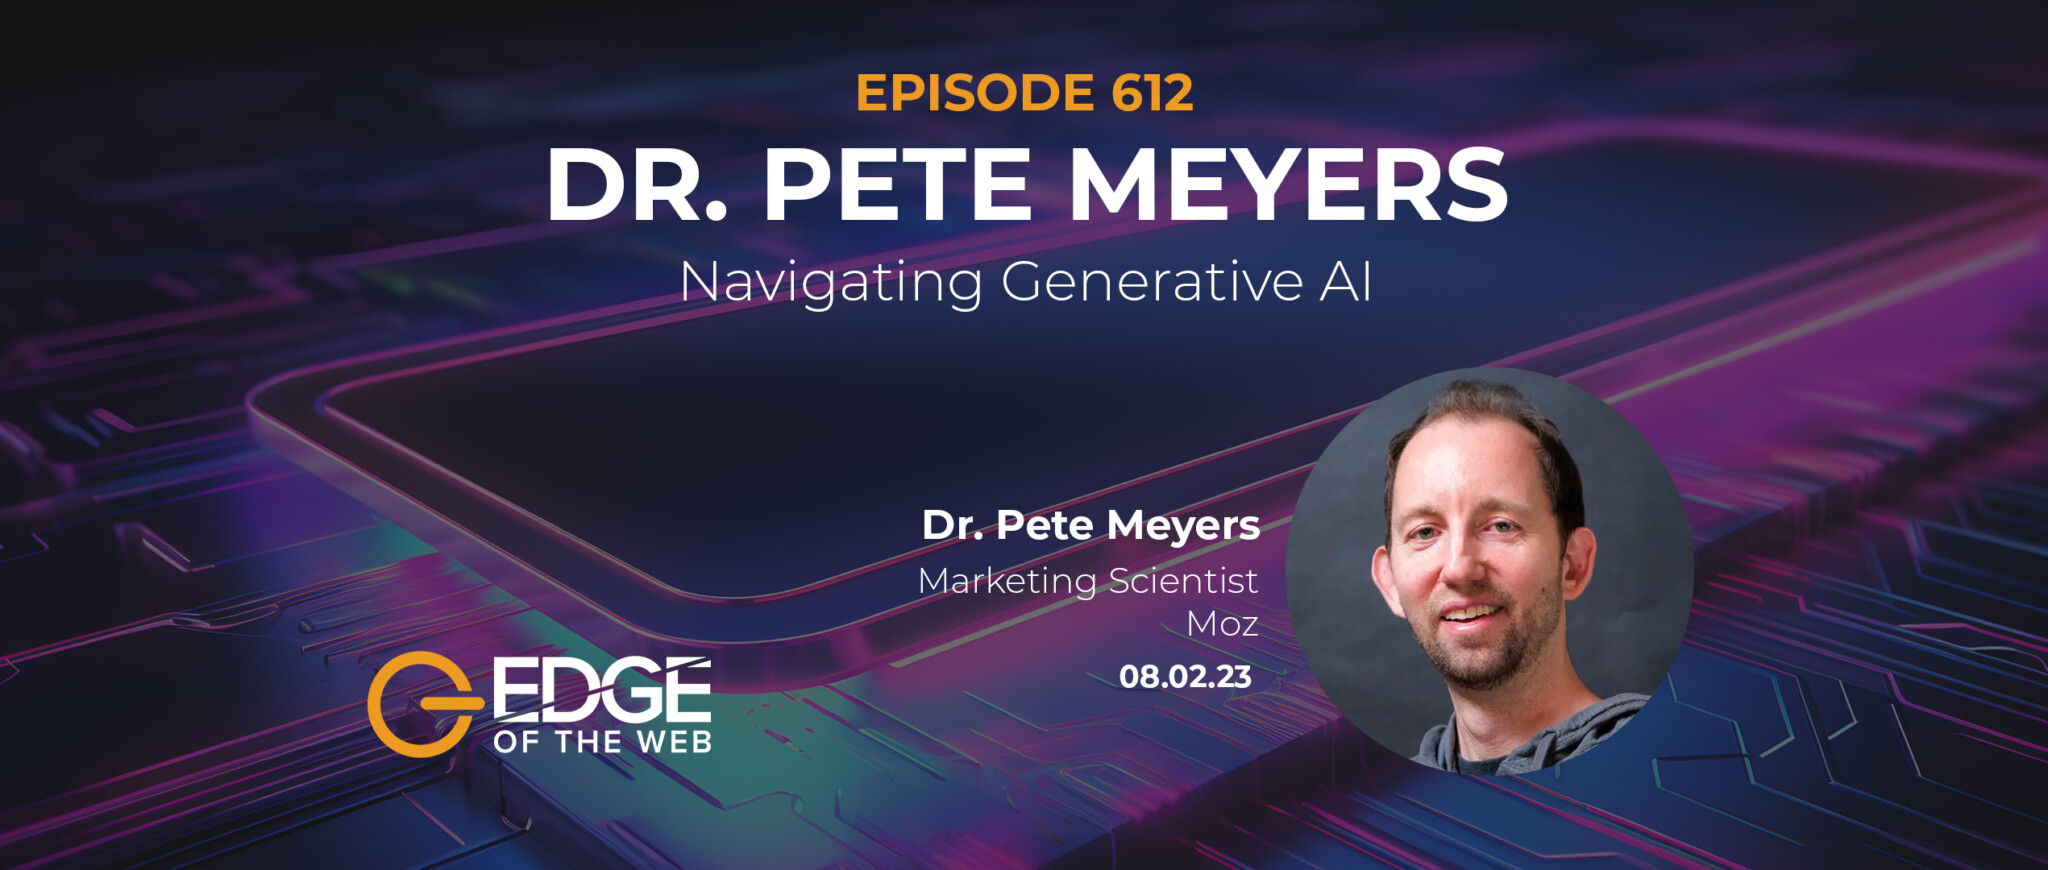 Dr. Pete Meyers - EDGE Episode 612 Featured Image